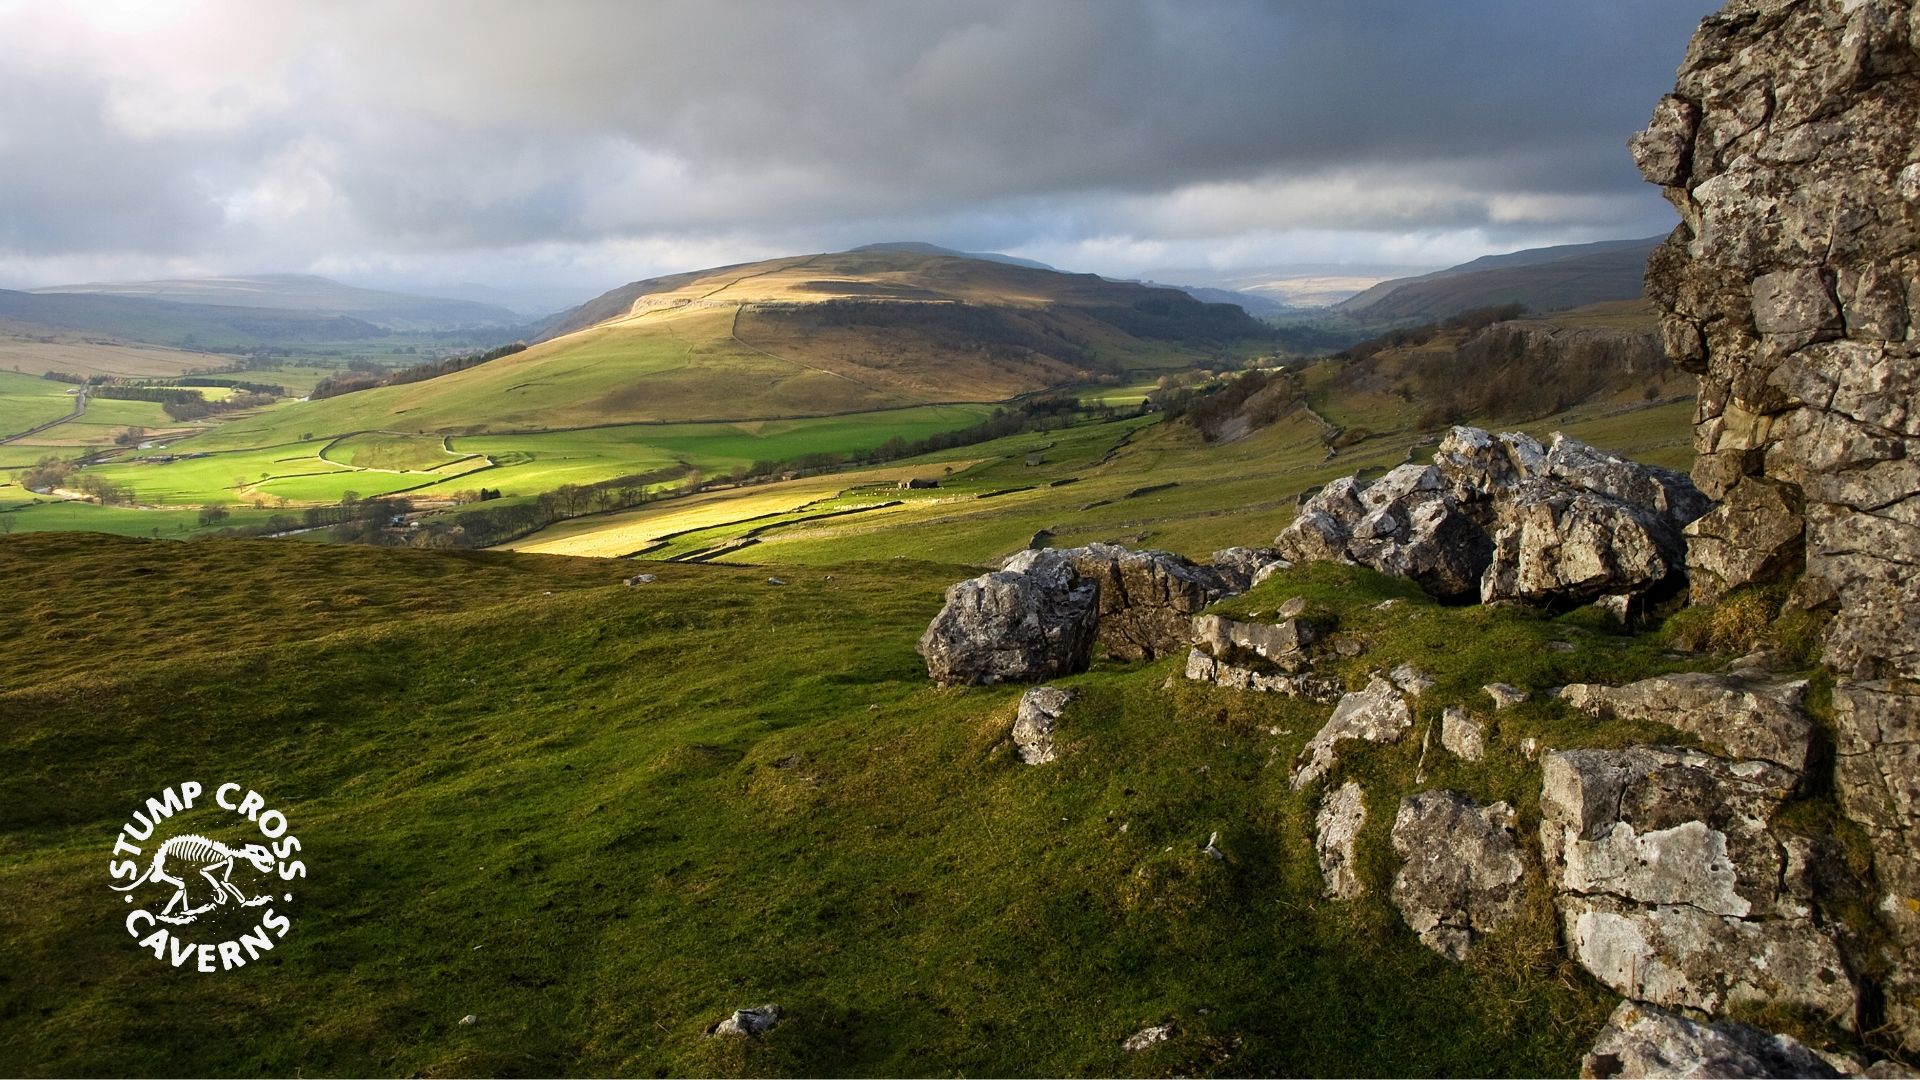 The Yorkshire Dales has many fantastic circular walks. Join us as we journey through the amazing